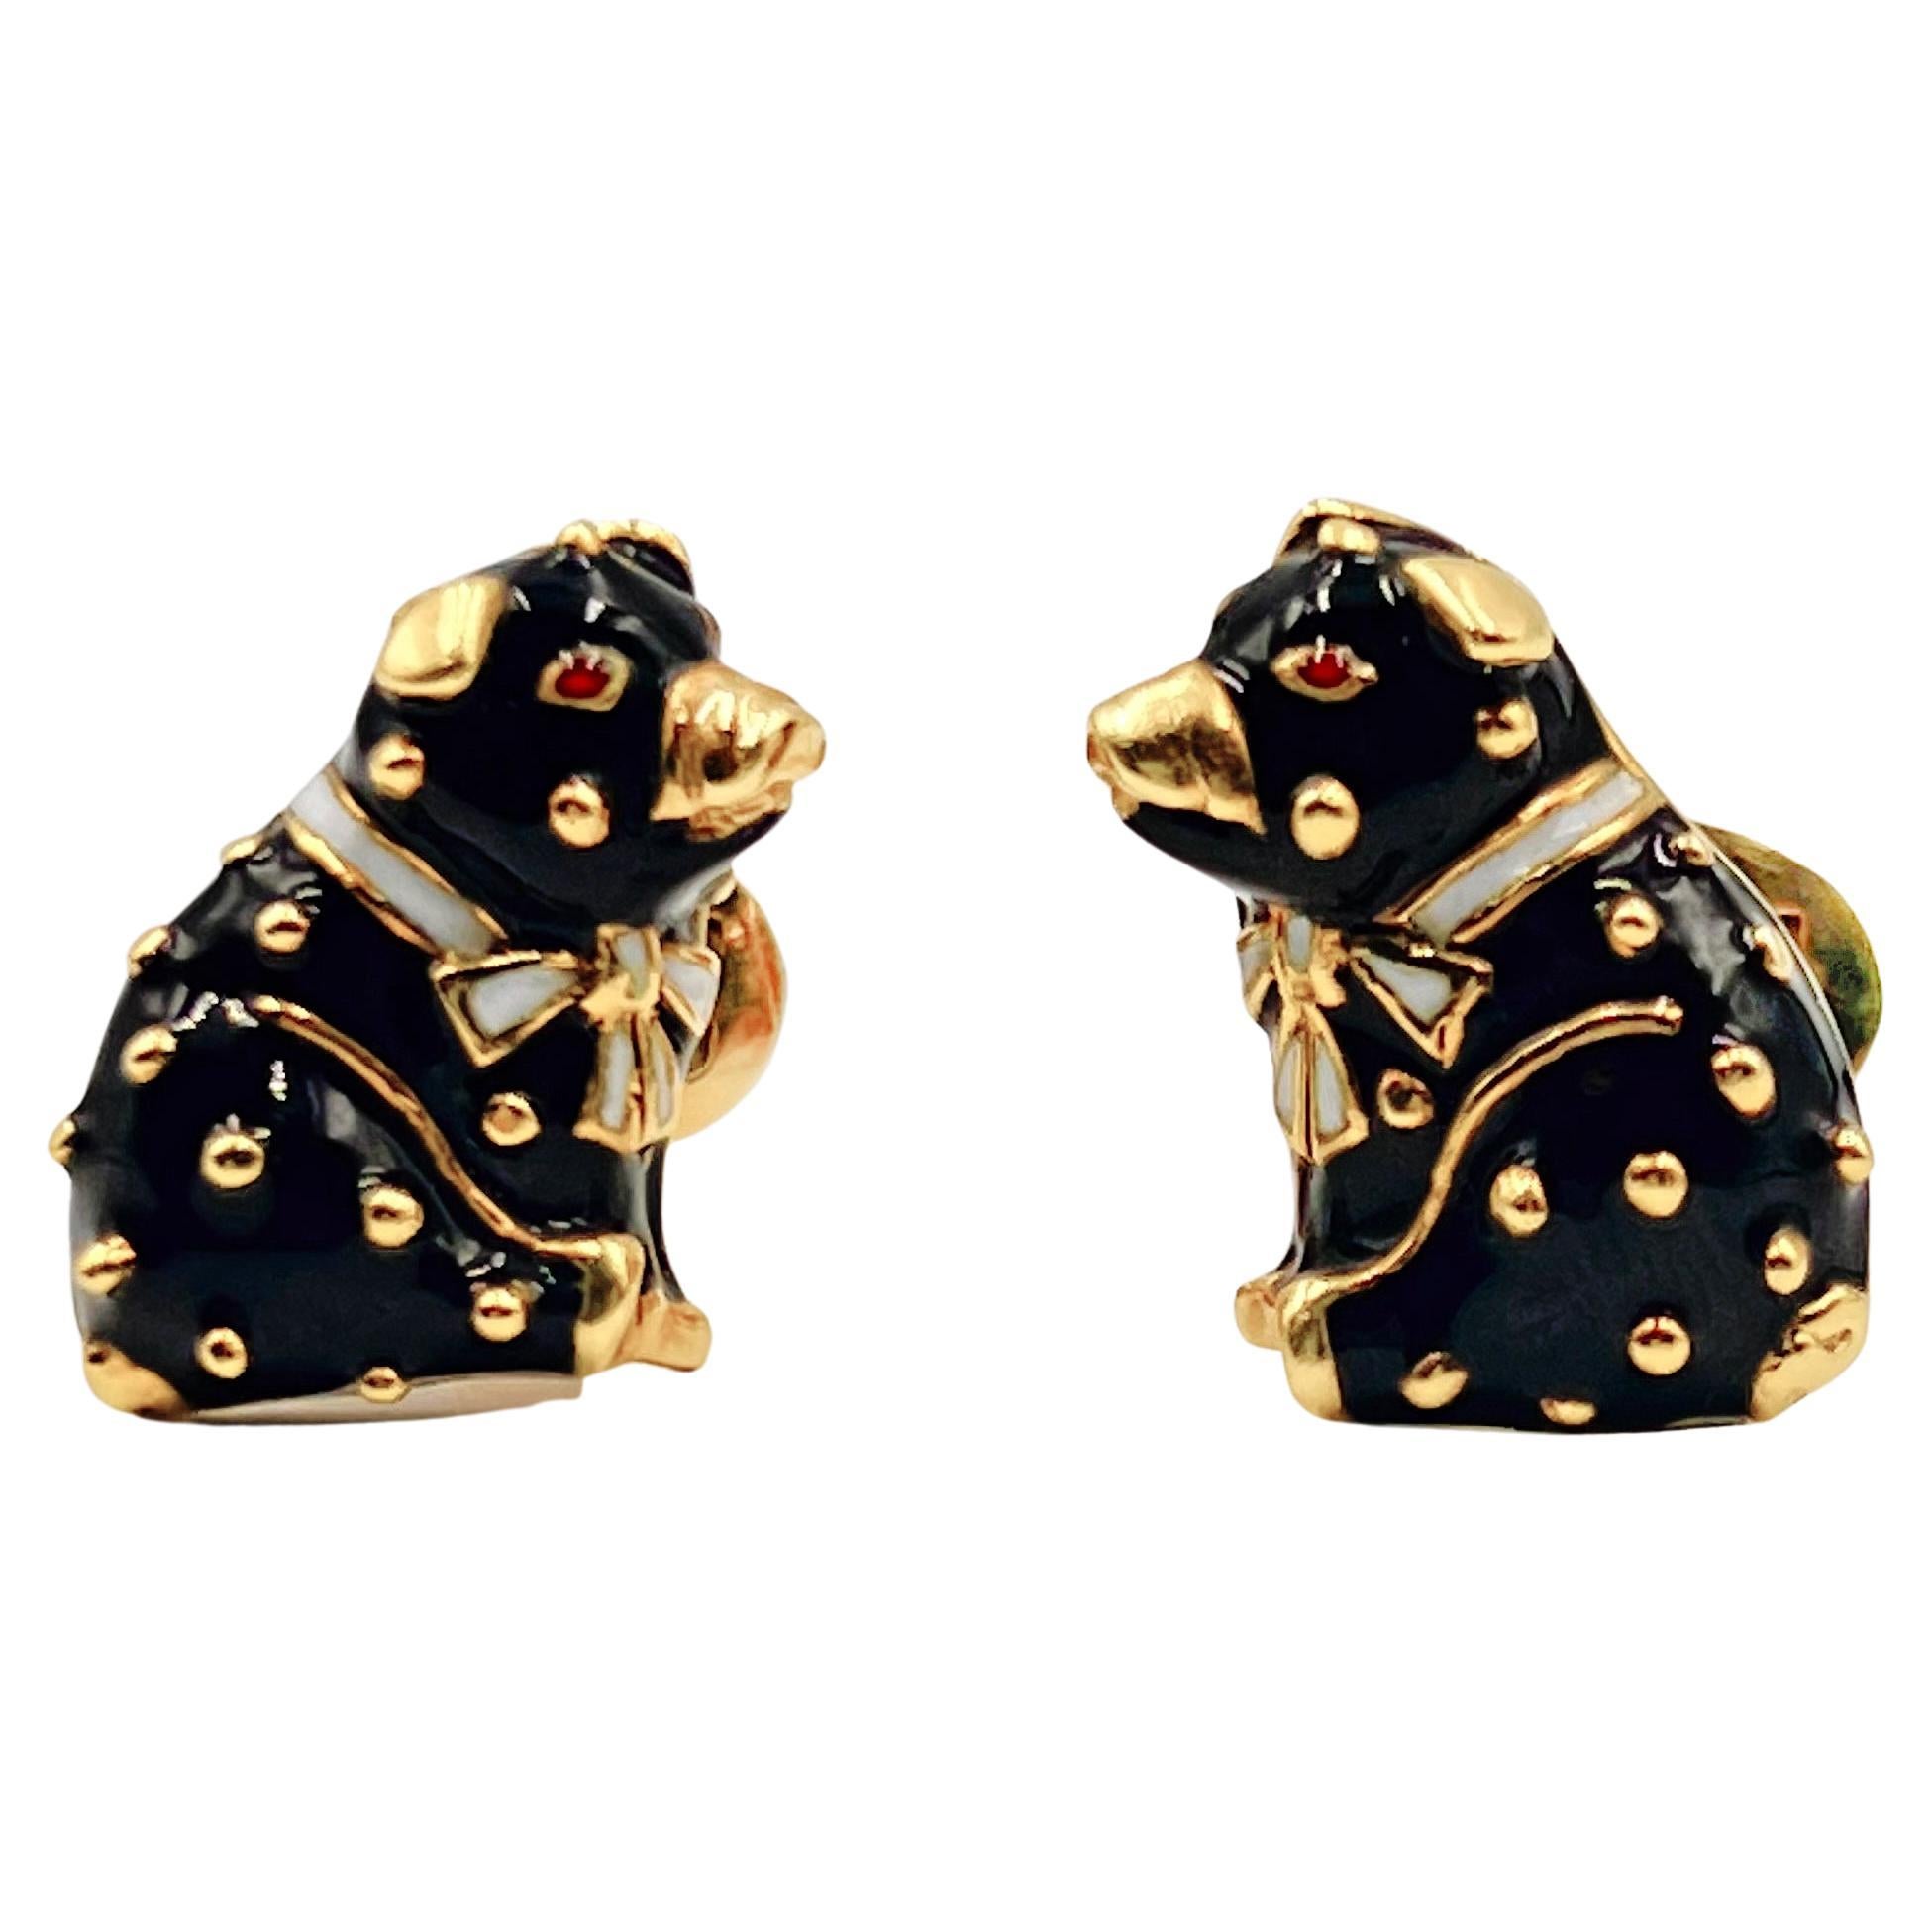 18k Yellow Gold Black Enamel Pig Cufflinks In Excellent Condition For Sale In Palm Beach, FL